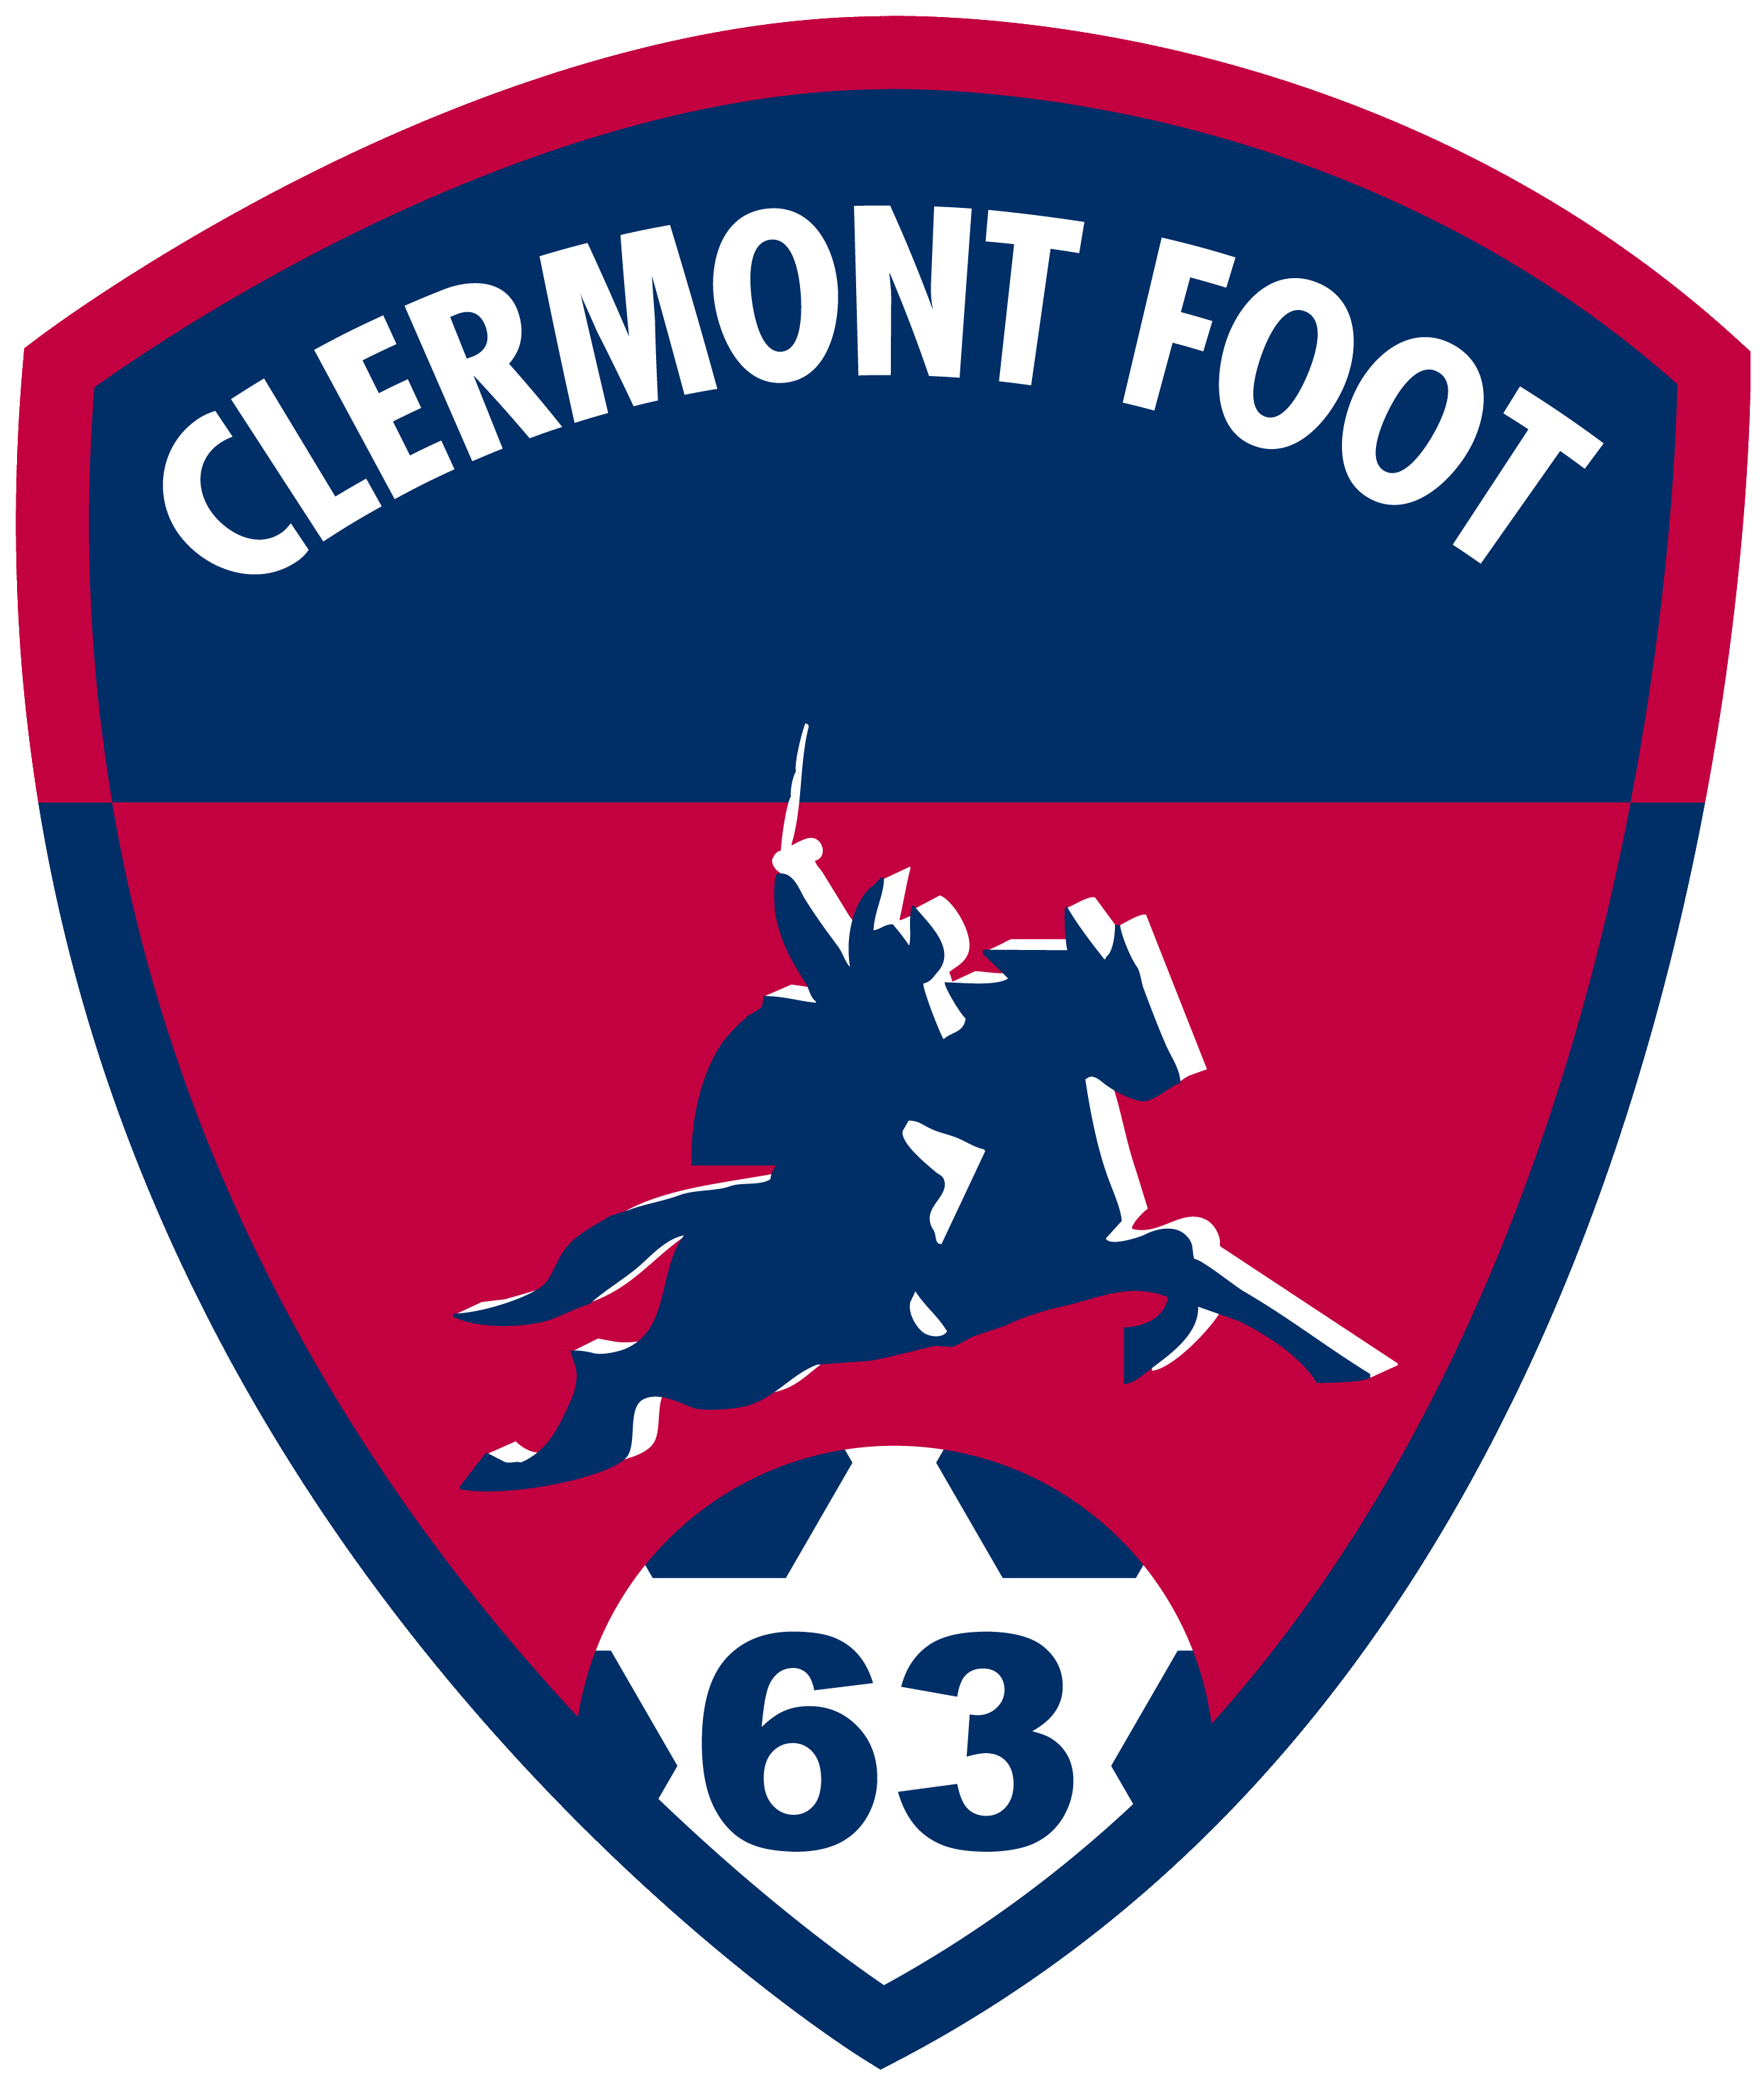 Clermont Foot 63 vs Lorient Prediction: Both teams to score or over 2.5 goals 